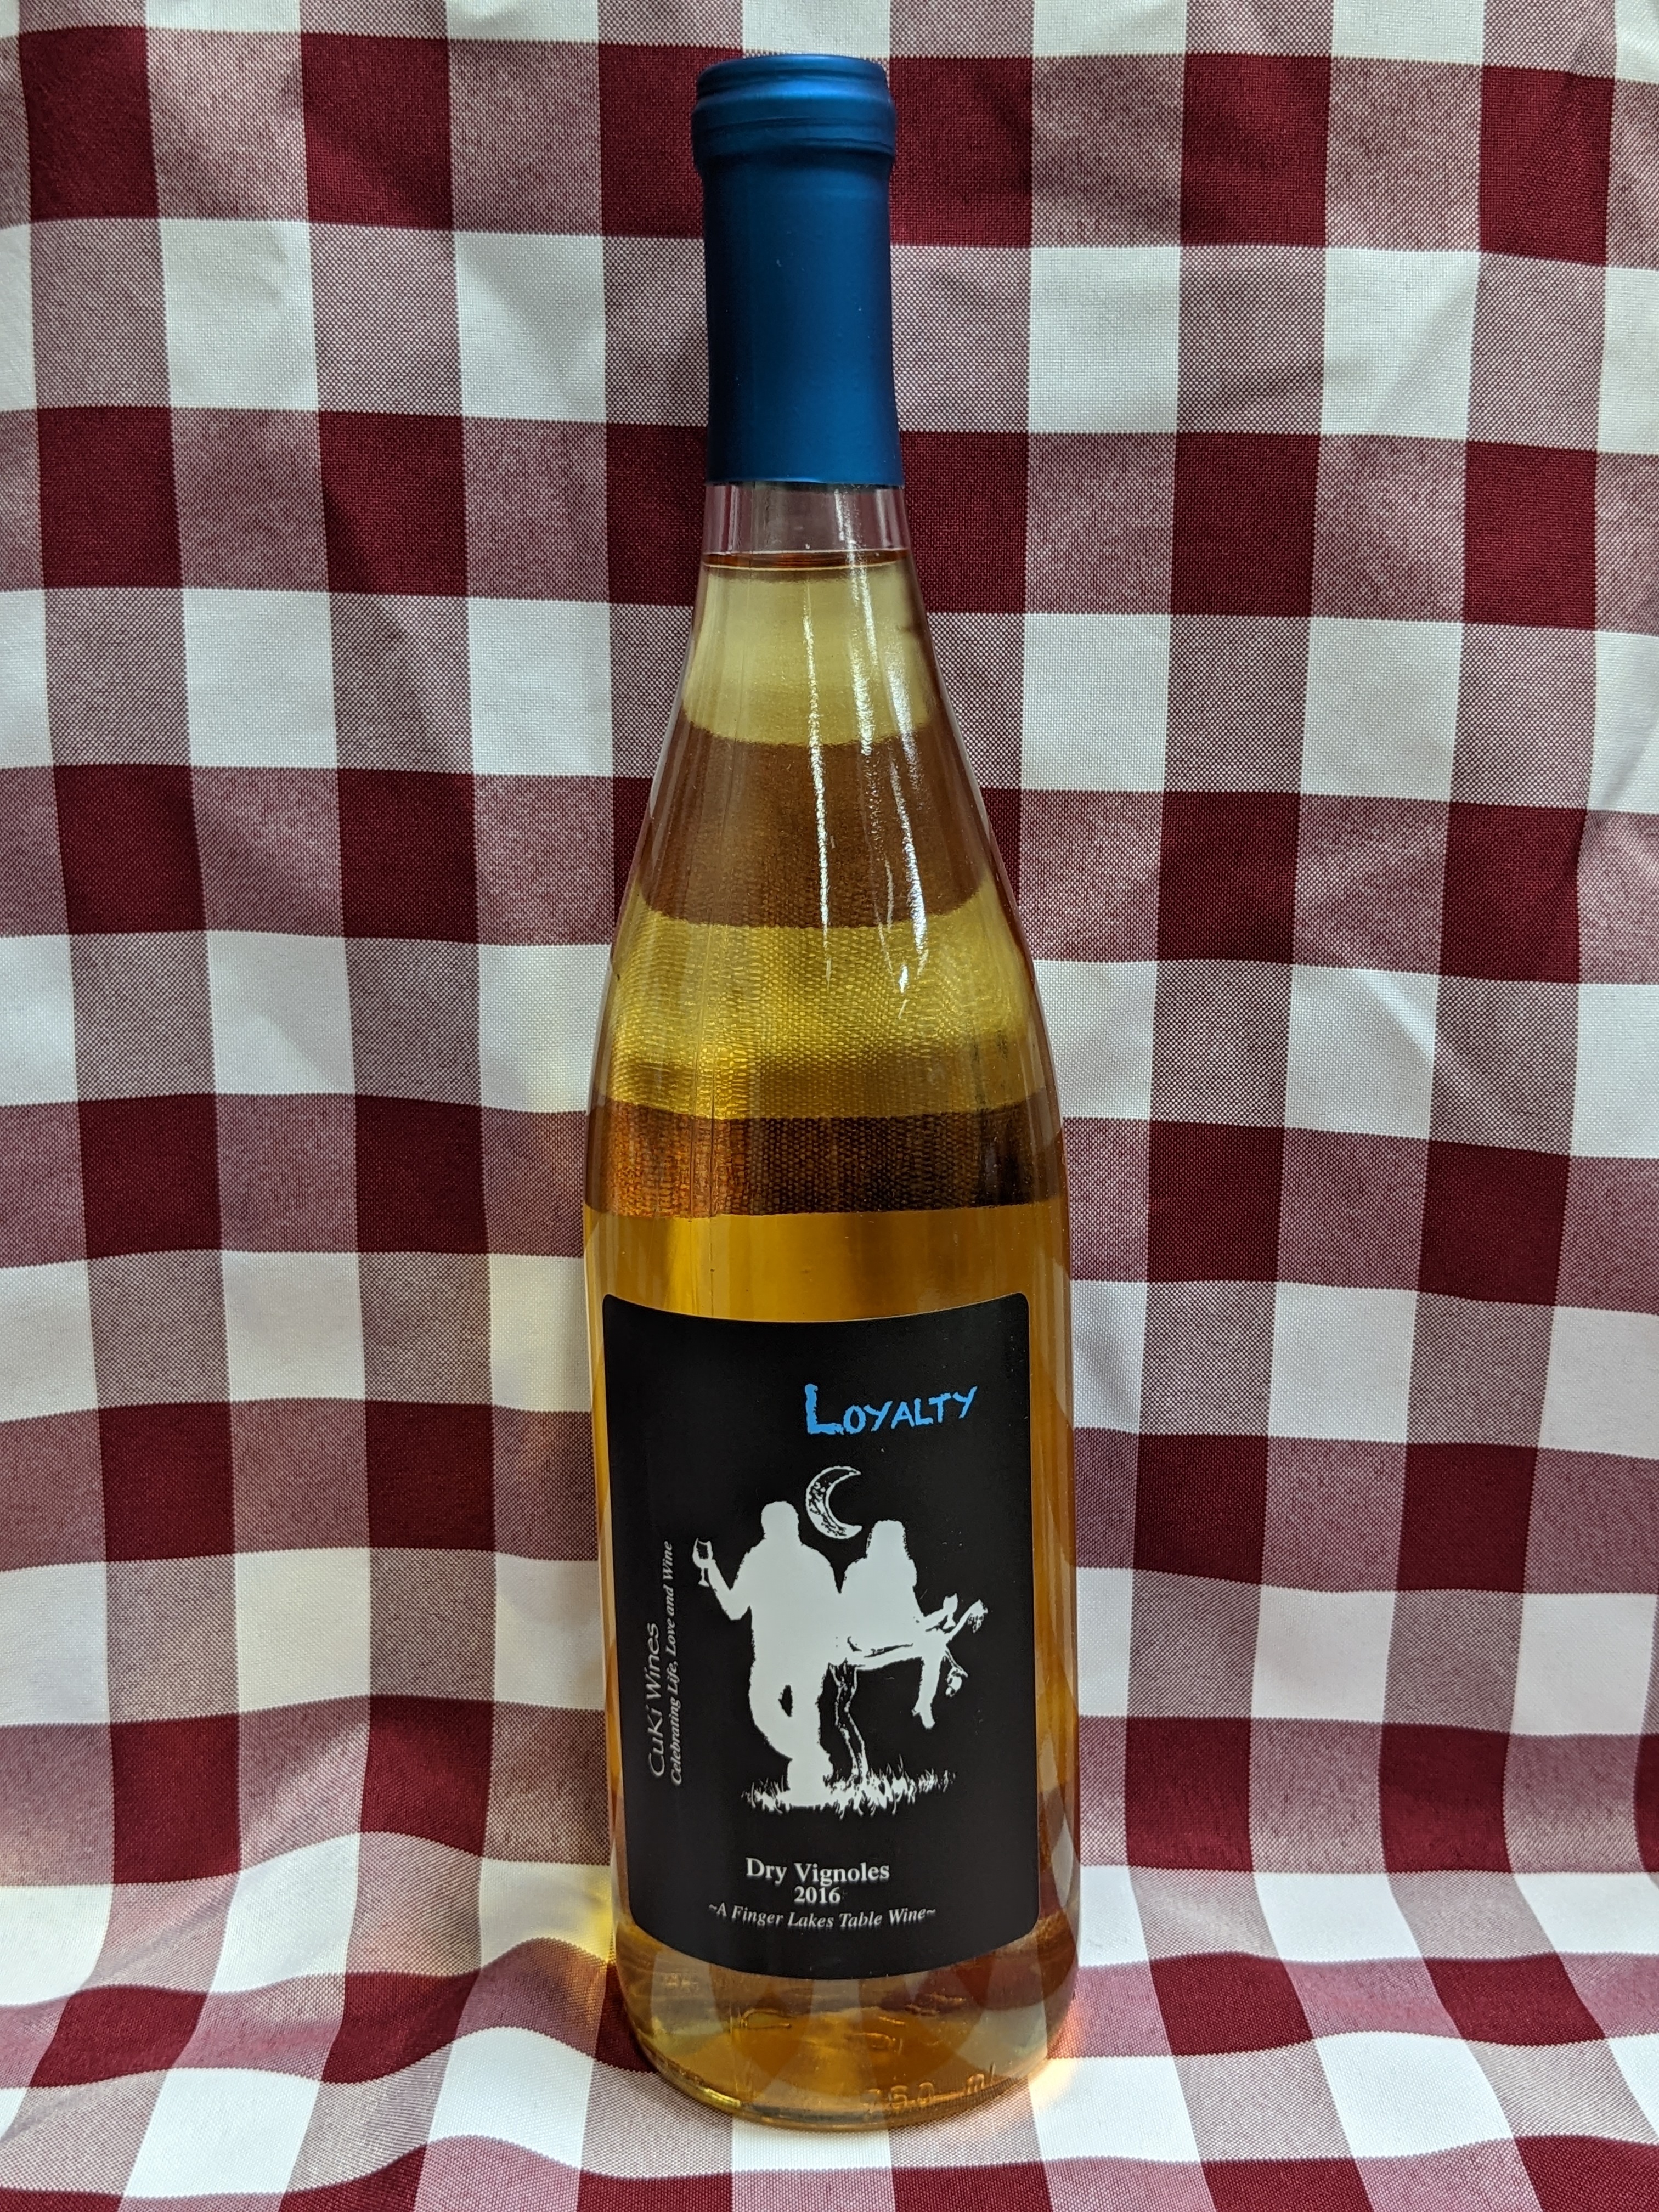 Product Image for CuKi - Loyalty (Dry Vignoles) 2016